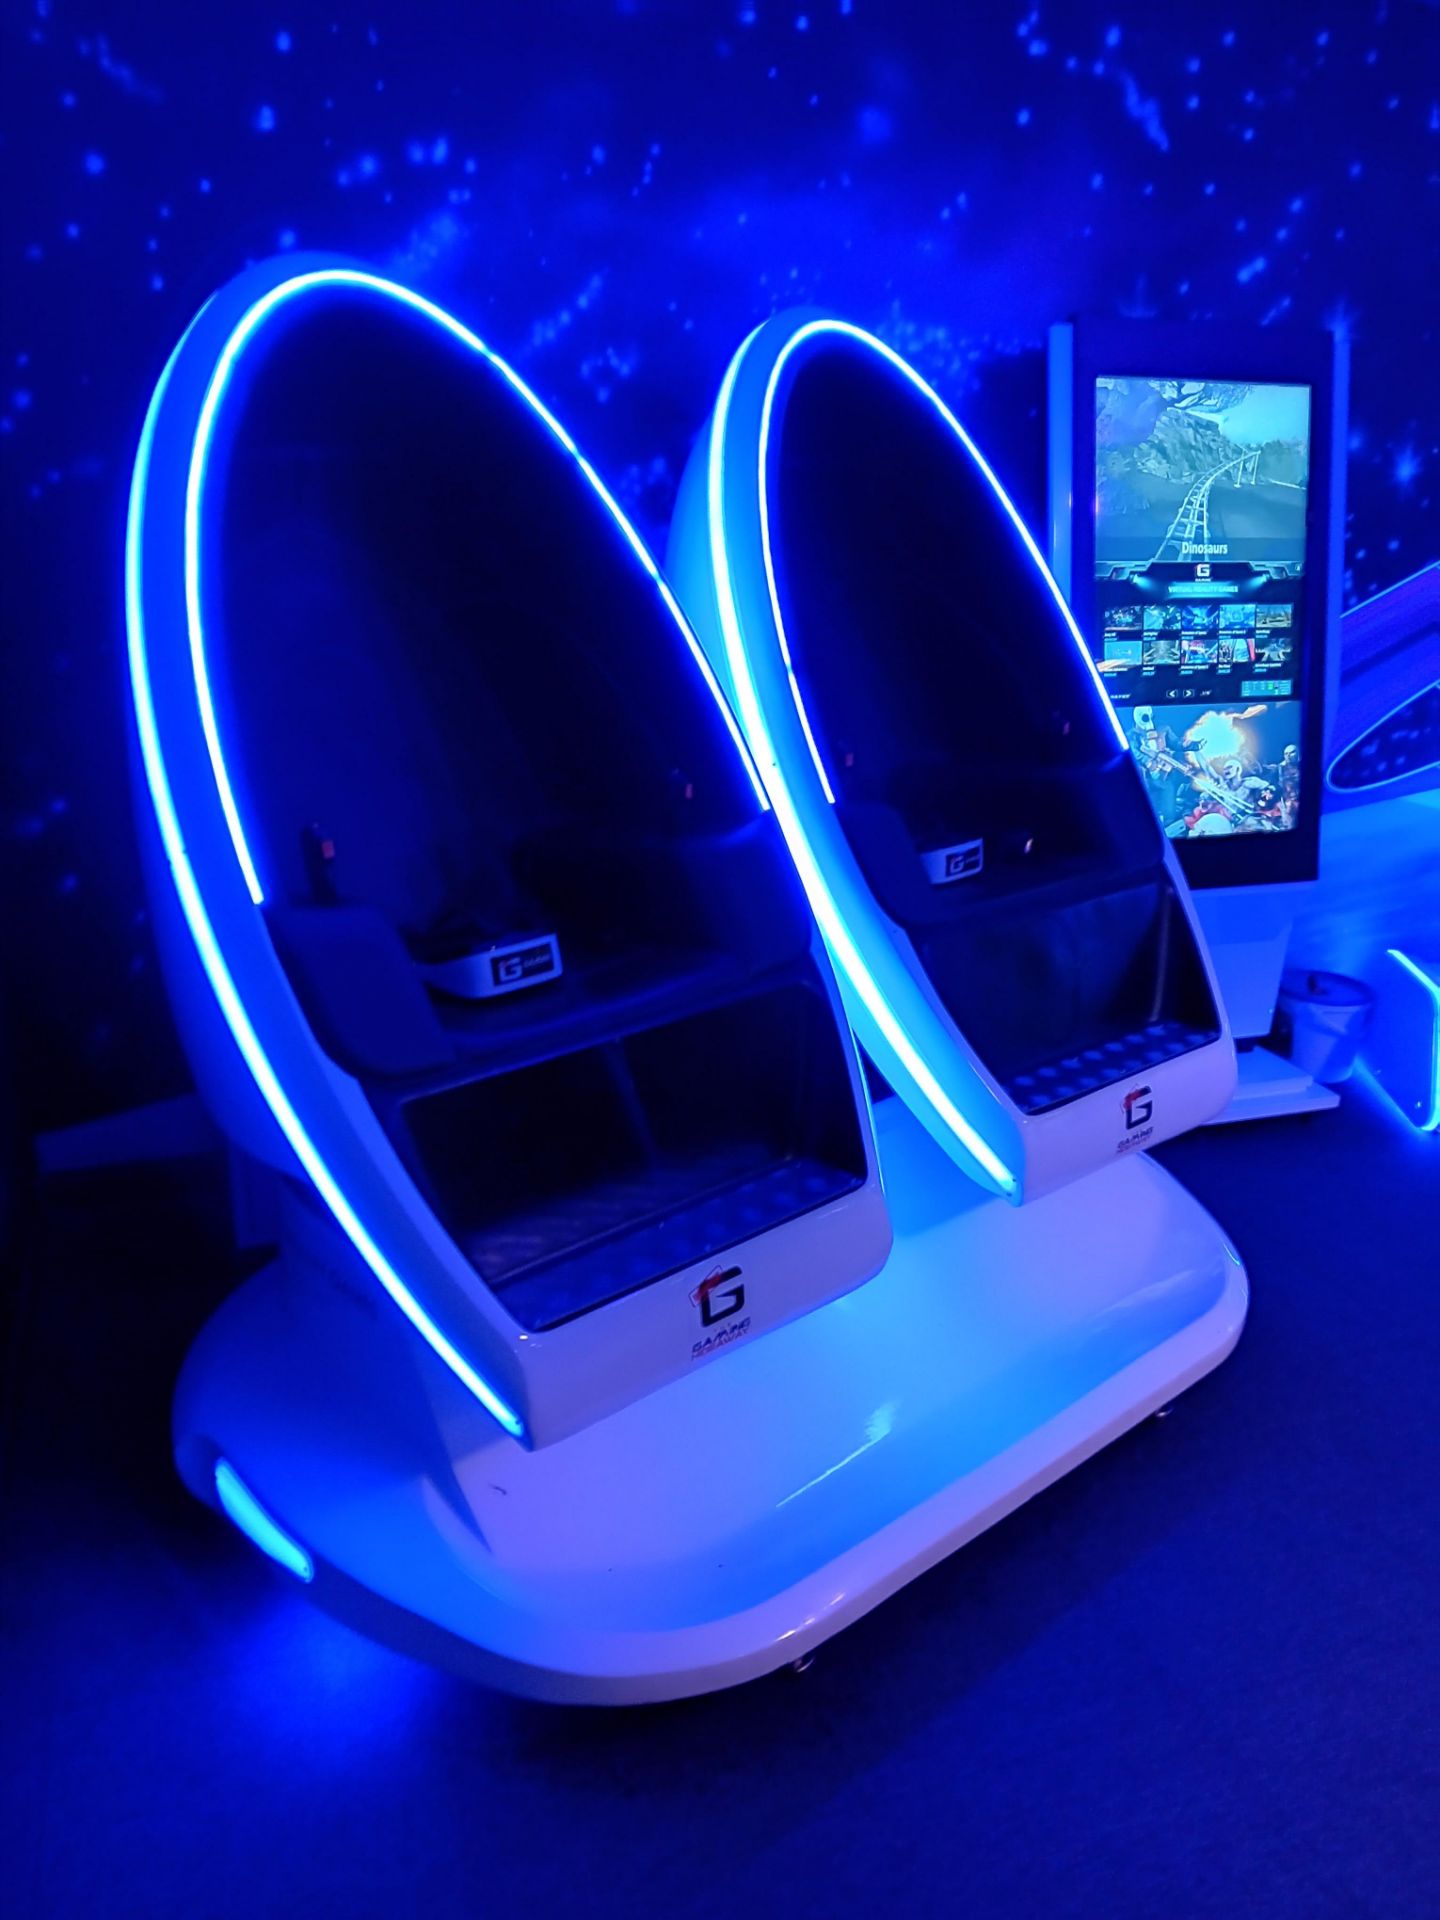 Owatch 2-Person Twin Pod VR Motion Ride Simulator Chair – Cost New £9,600 - Buyer to Disconnect & - Image 3 of 4